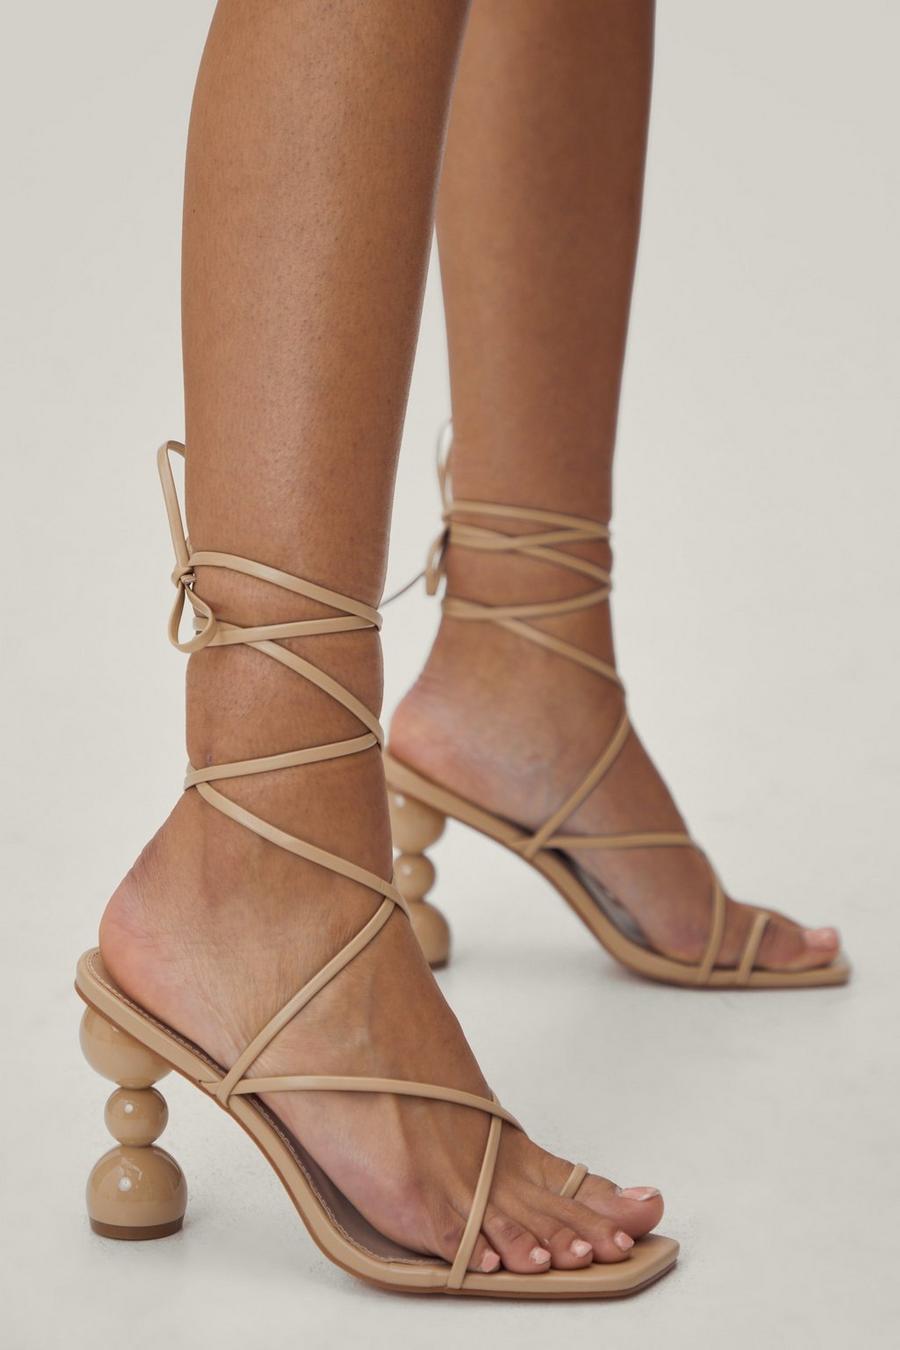 Faux Leather Strappy Alternative High Heels